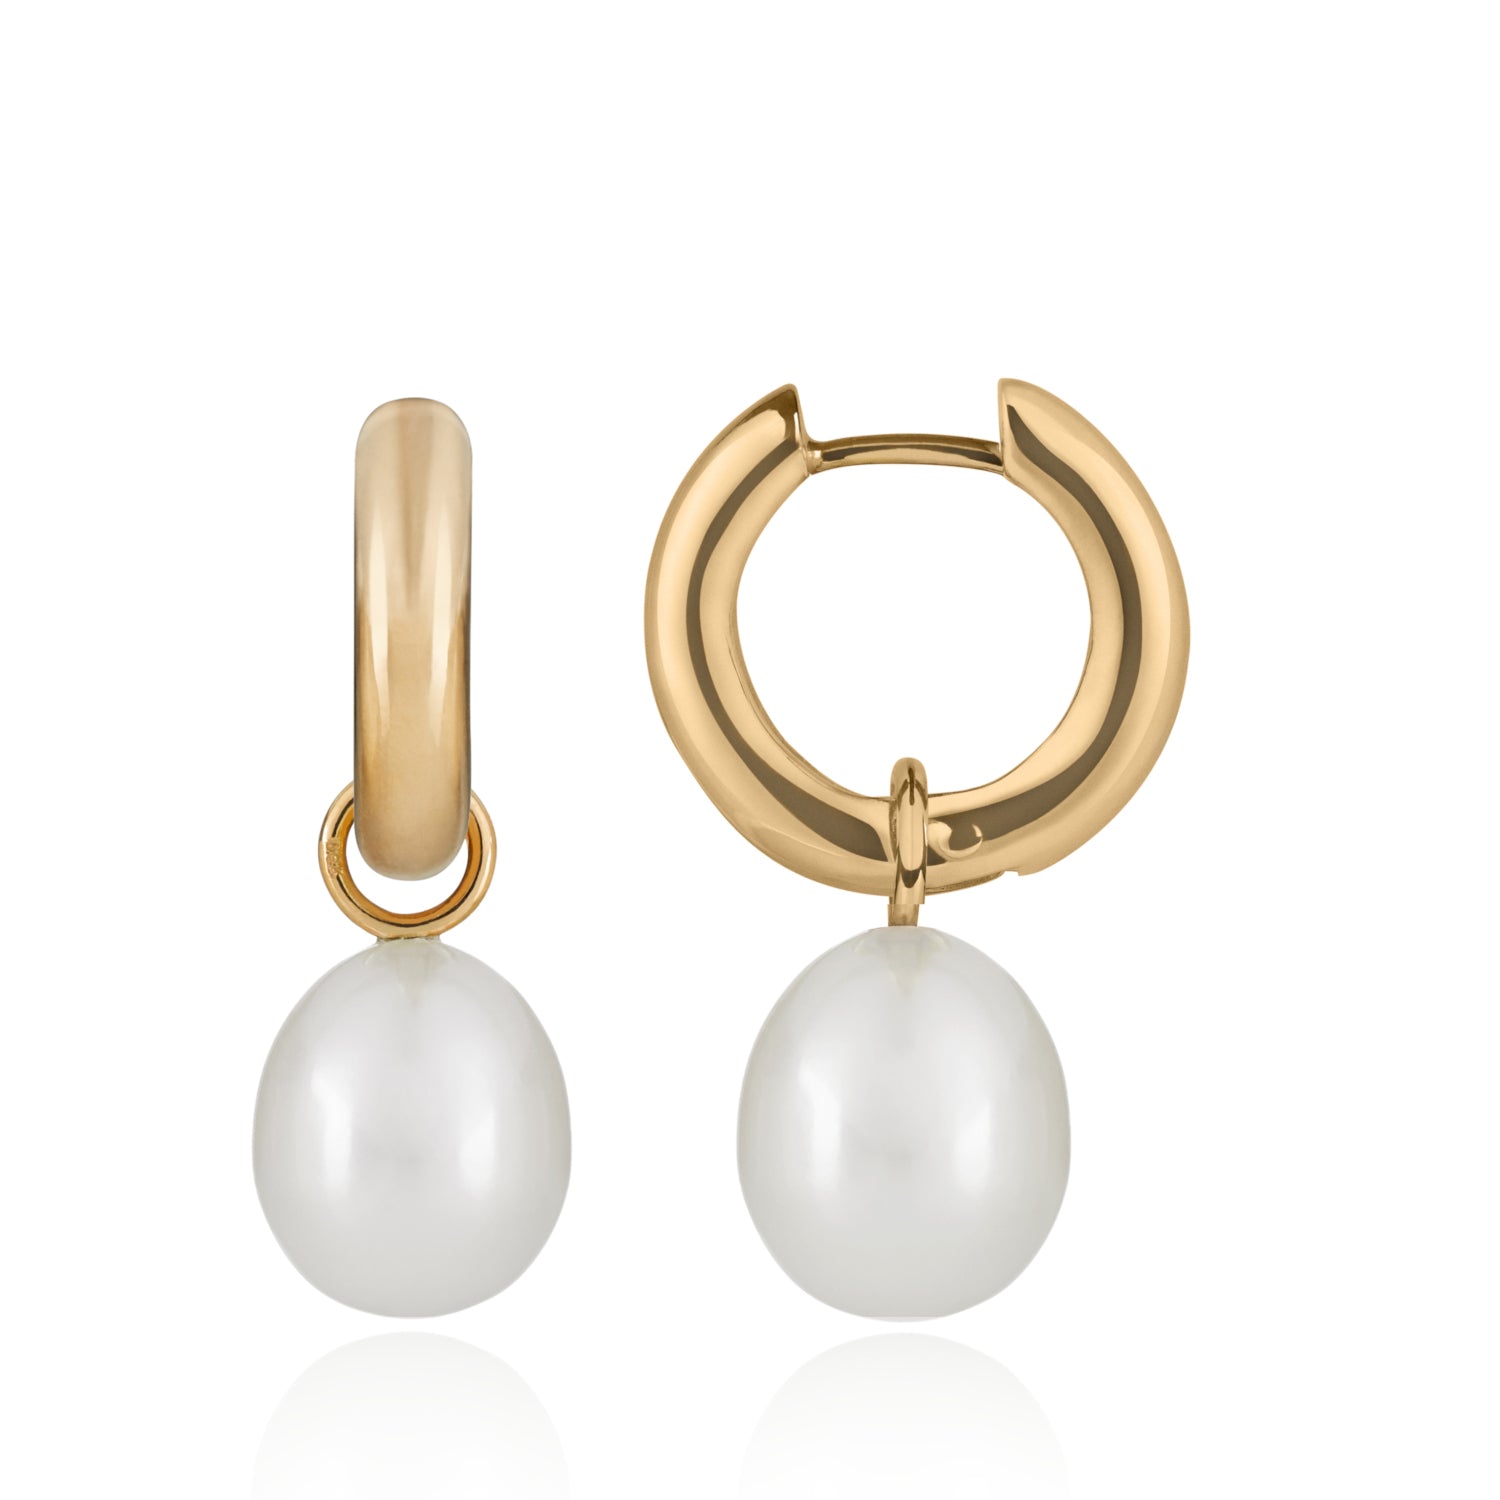 Chunky Polished Gold Hoop Earrings with Pearl Pendants wide version by McFarlane Fine Jewellery